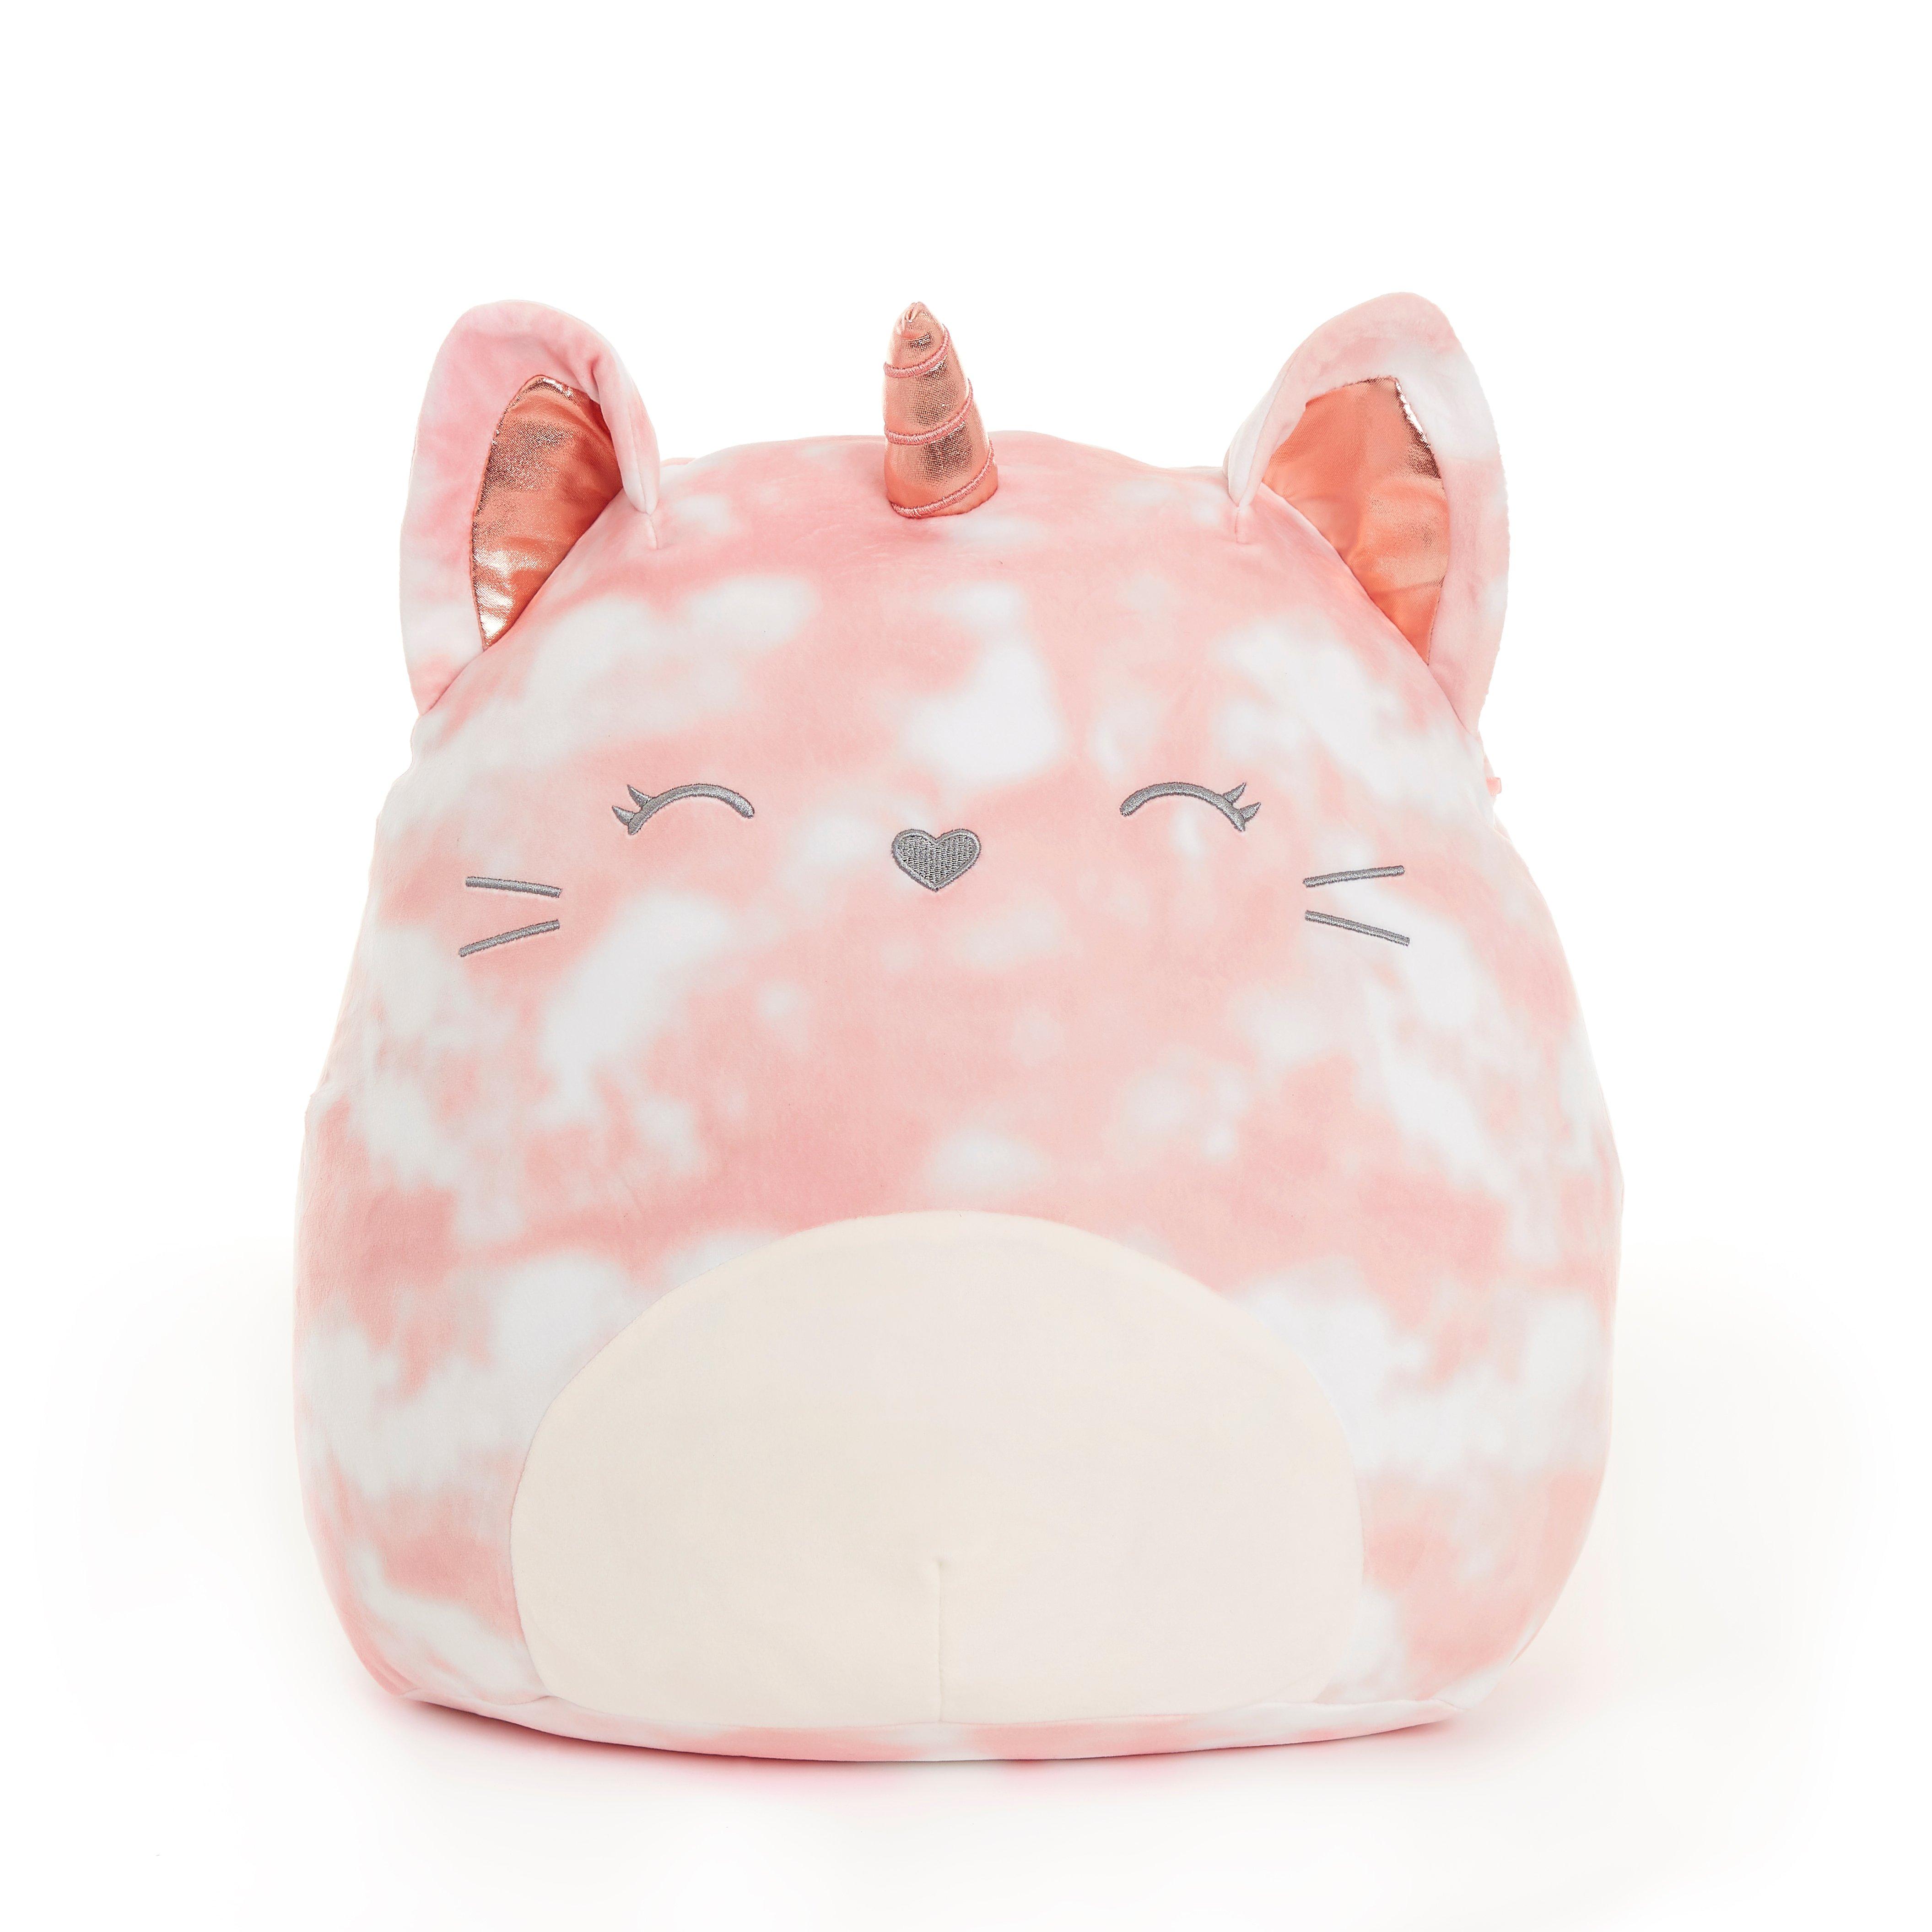 Squishmallows Caticorn Mermaid 16 inch Plush Toy Pink for sale online 